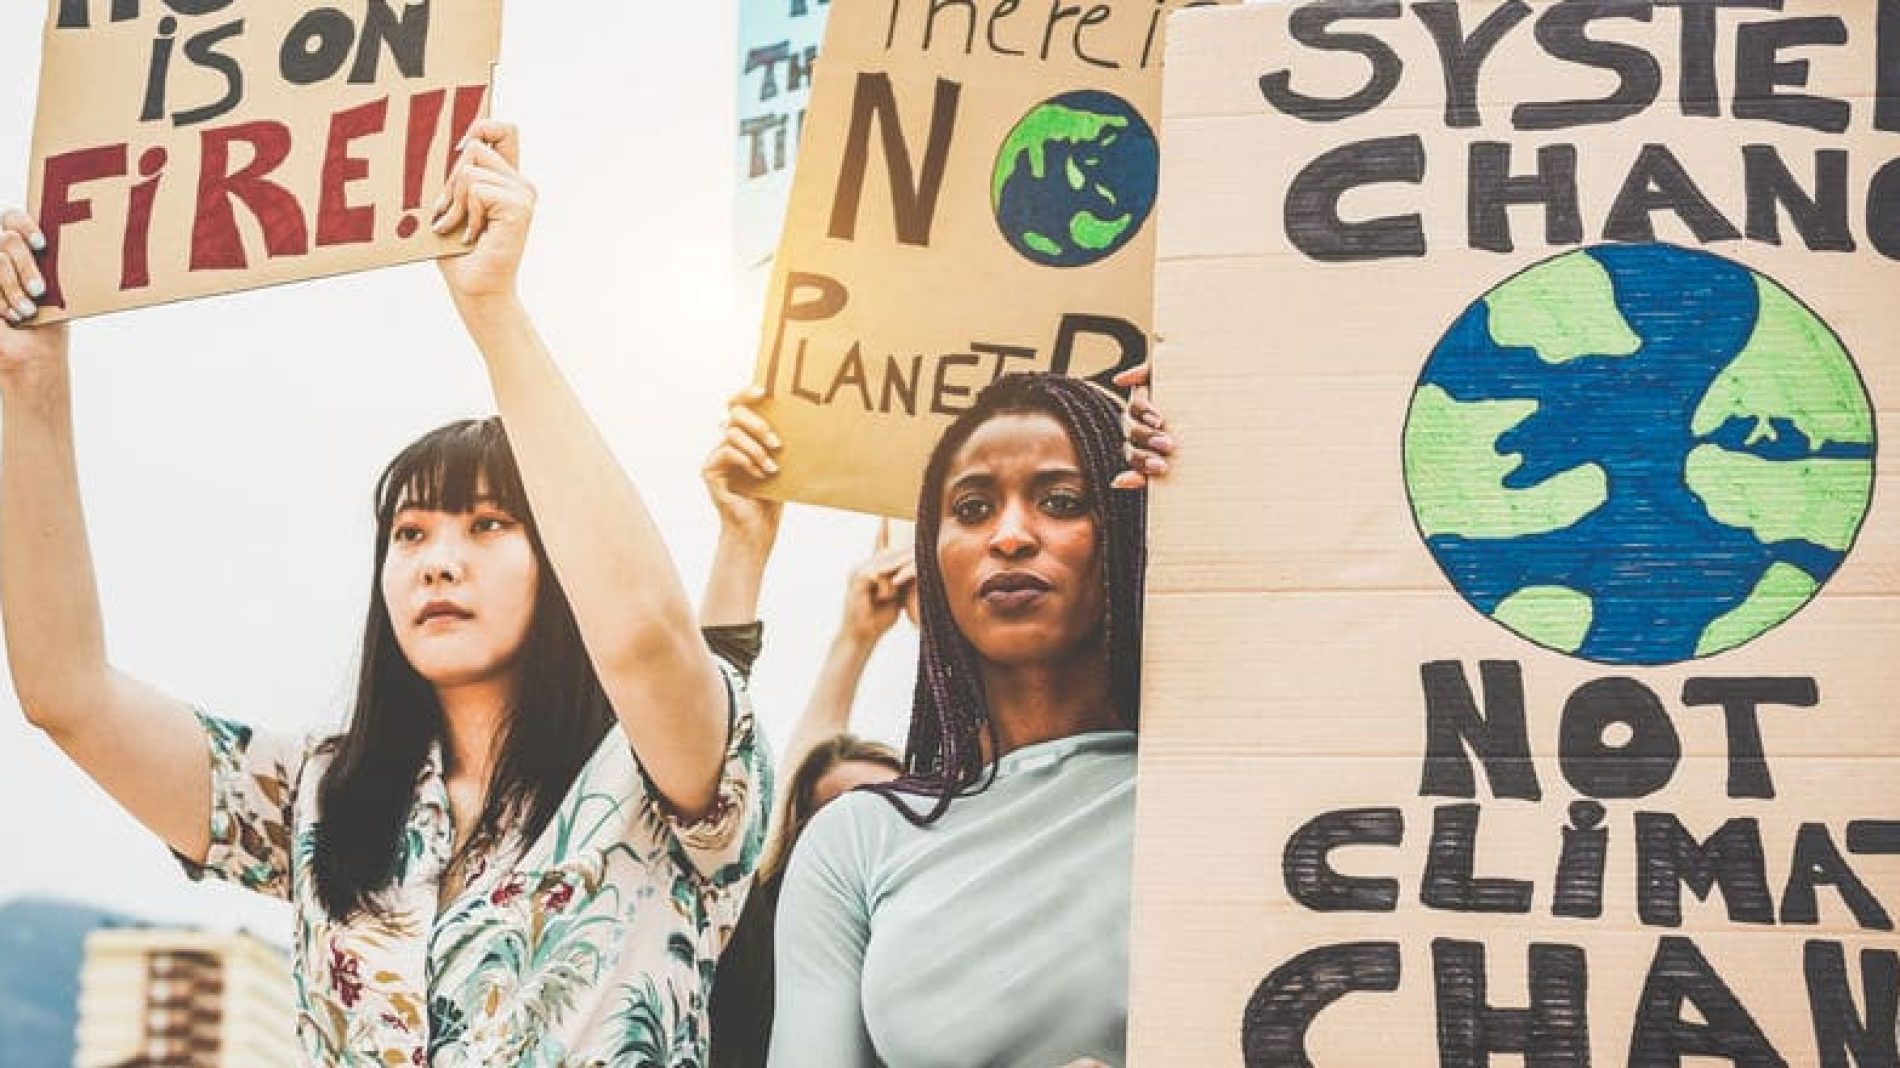 Find your nearest climate strike for this Friday